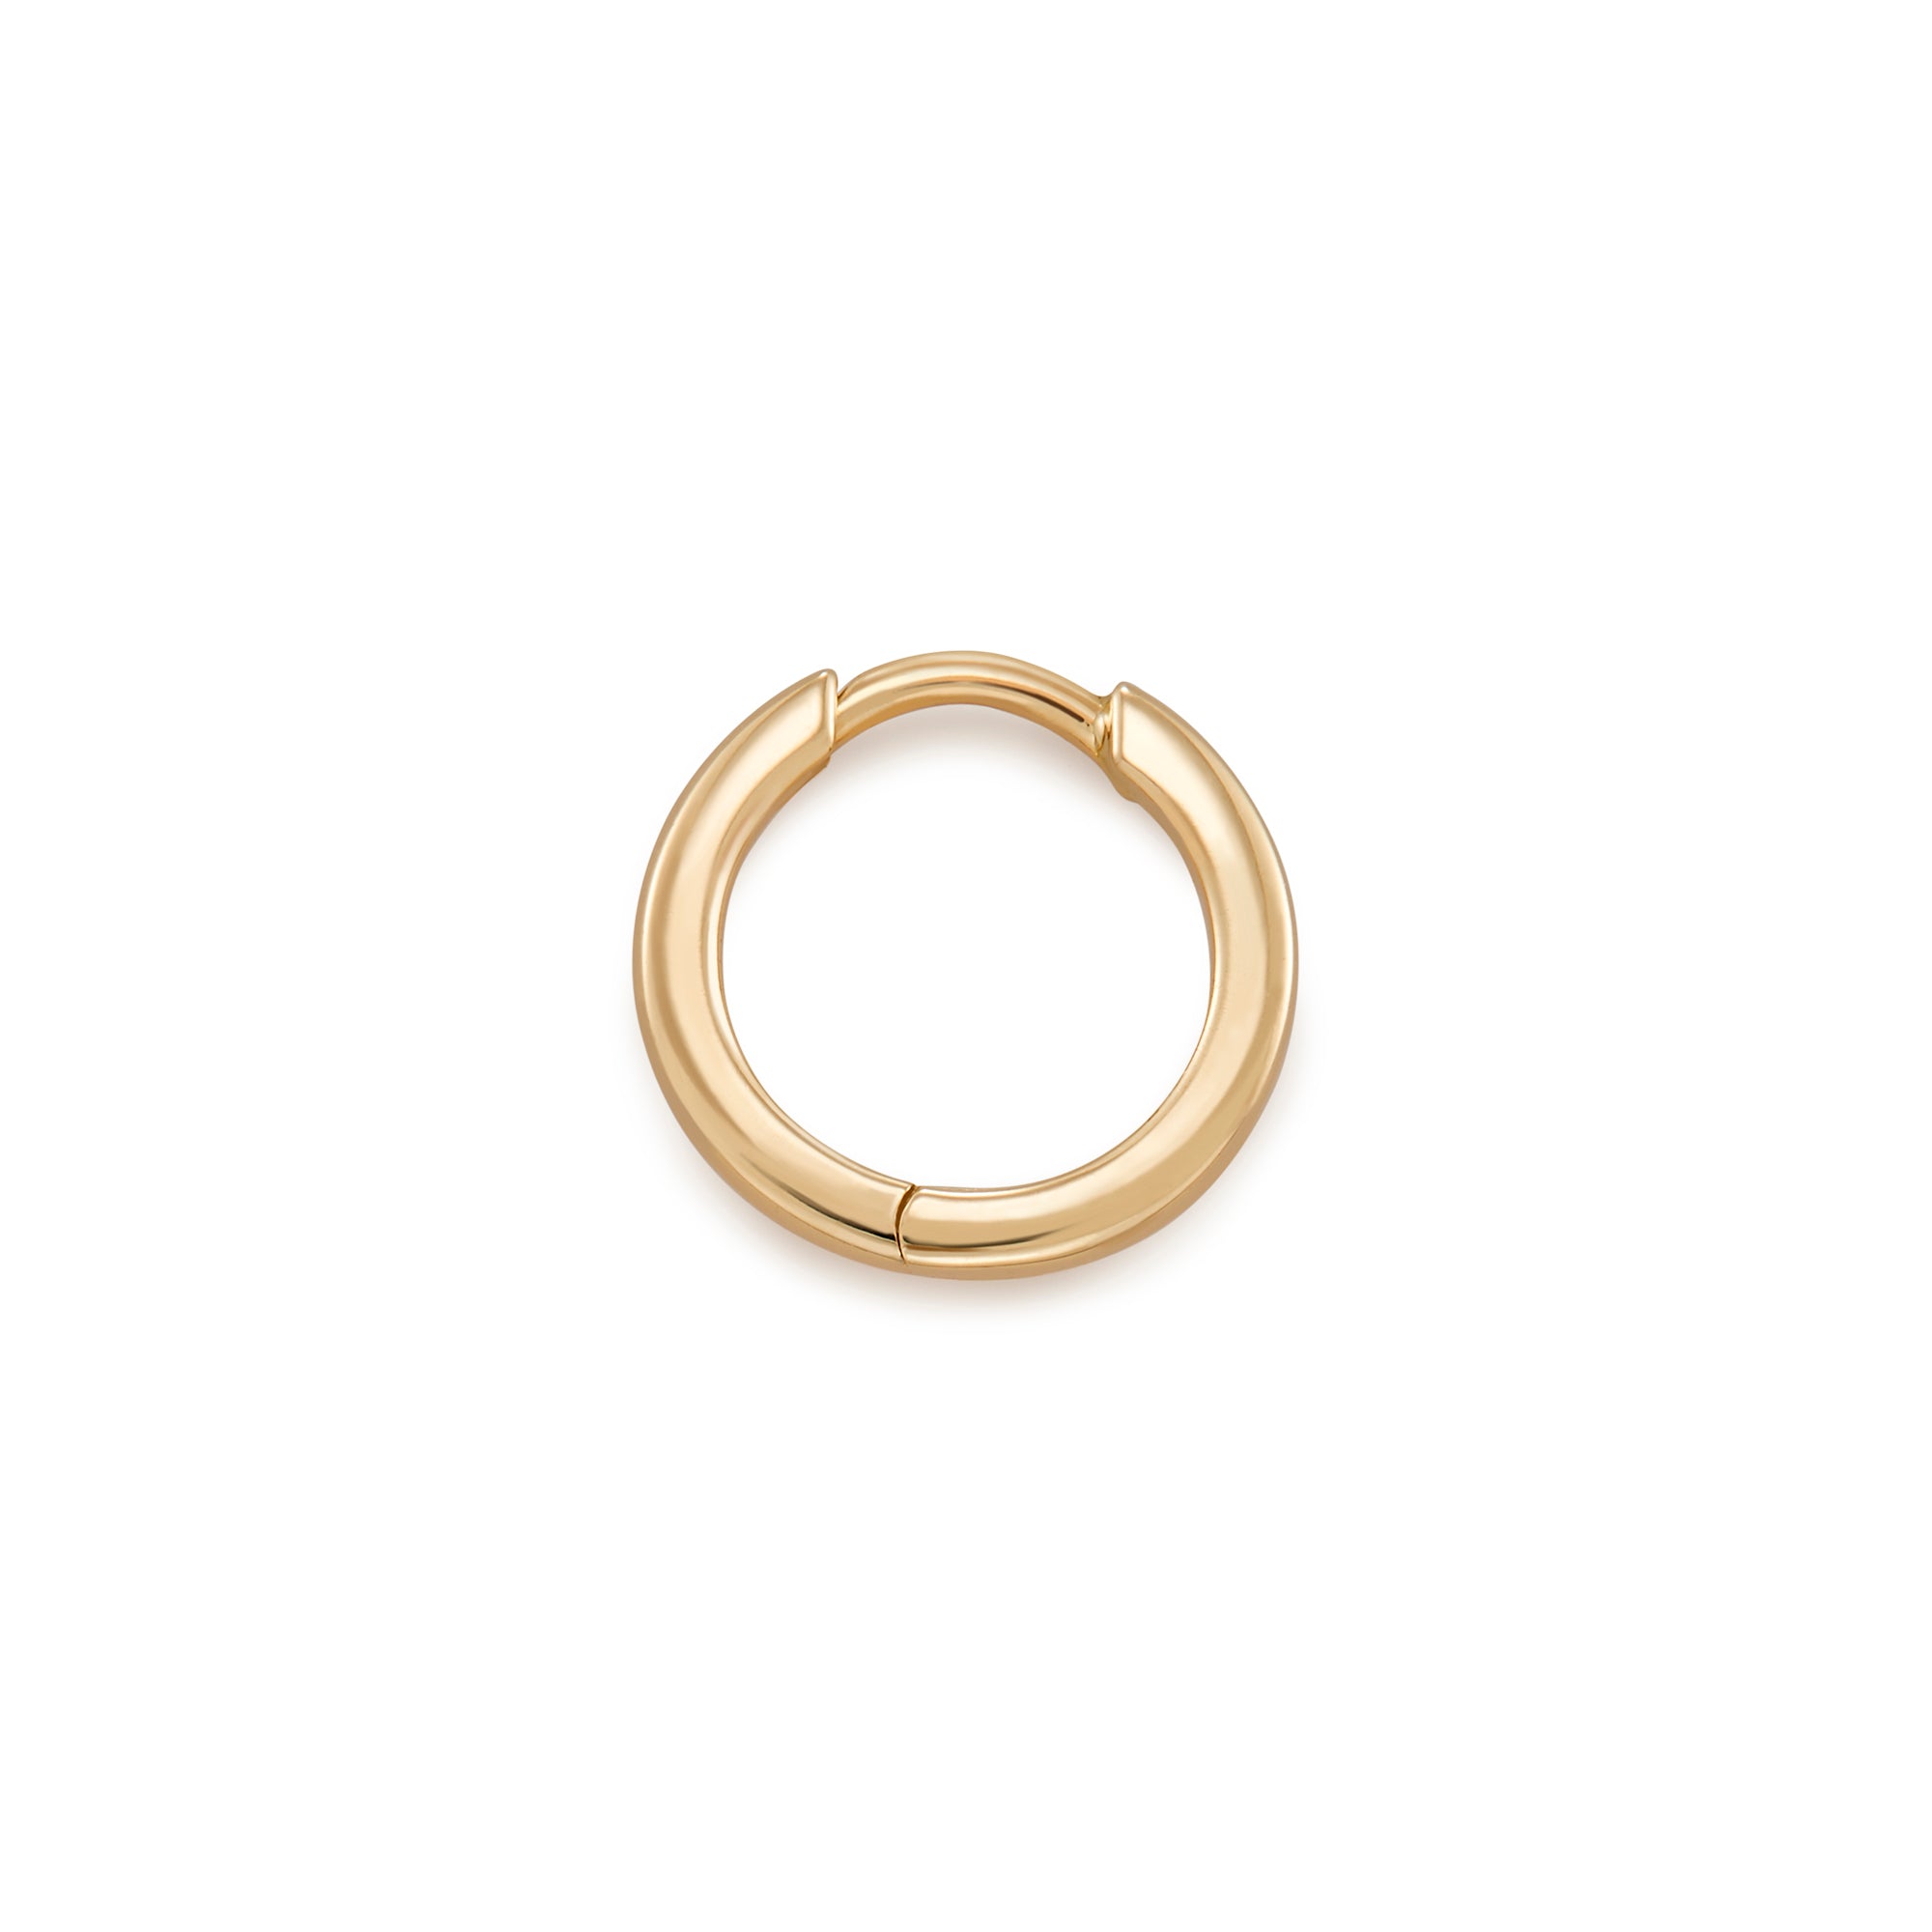 Simple Hinged Hoops featuring a secure closure and compact size in 14k gold, with your choice of two sizes, small or mini